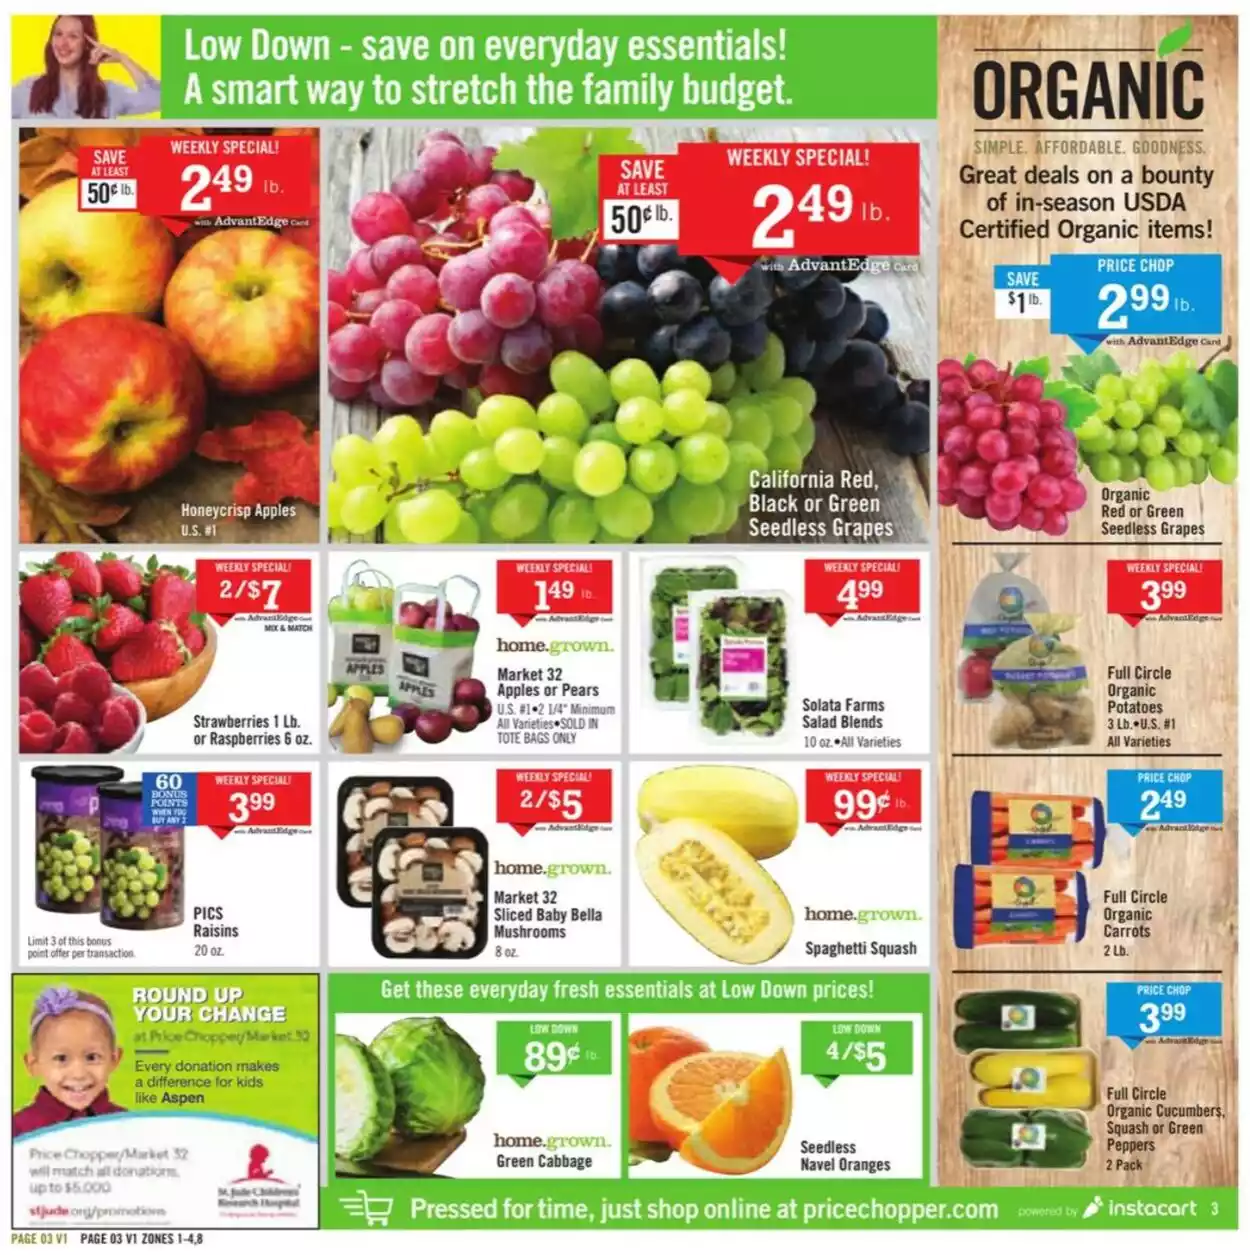 Price Chopper Weekly Ad Preview for March 26 - April 1, 2023 1